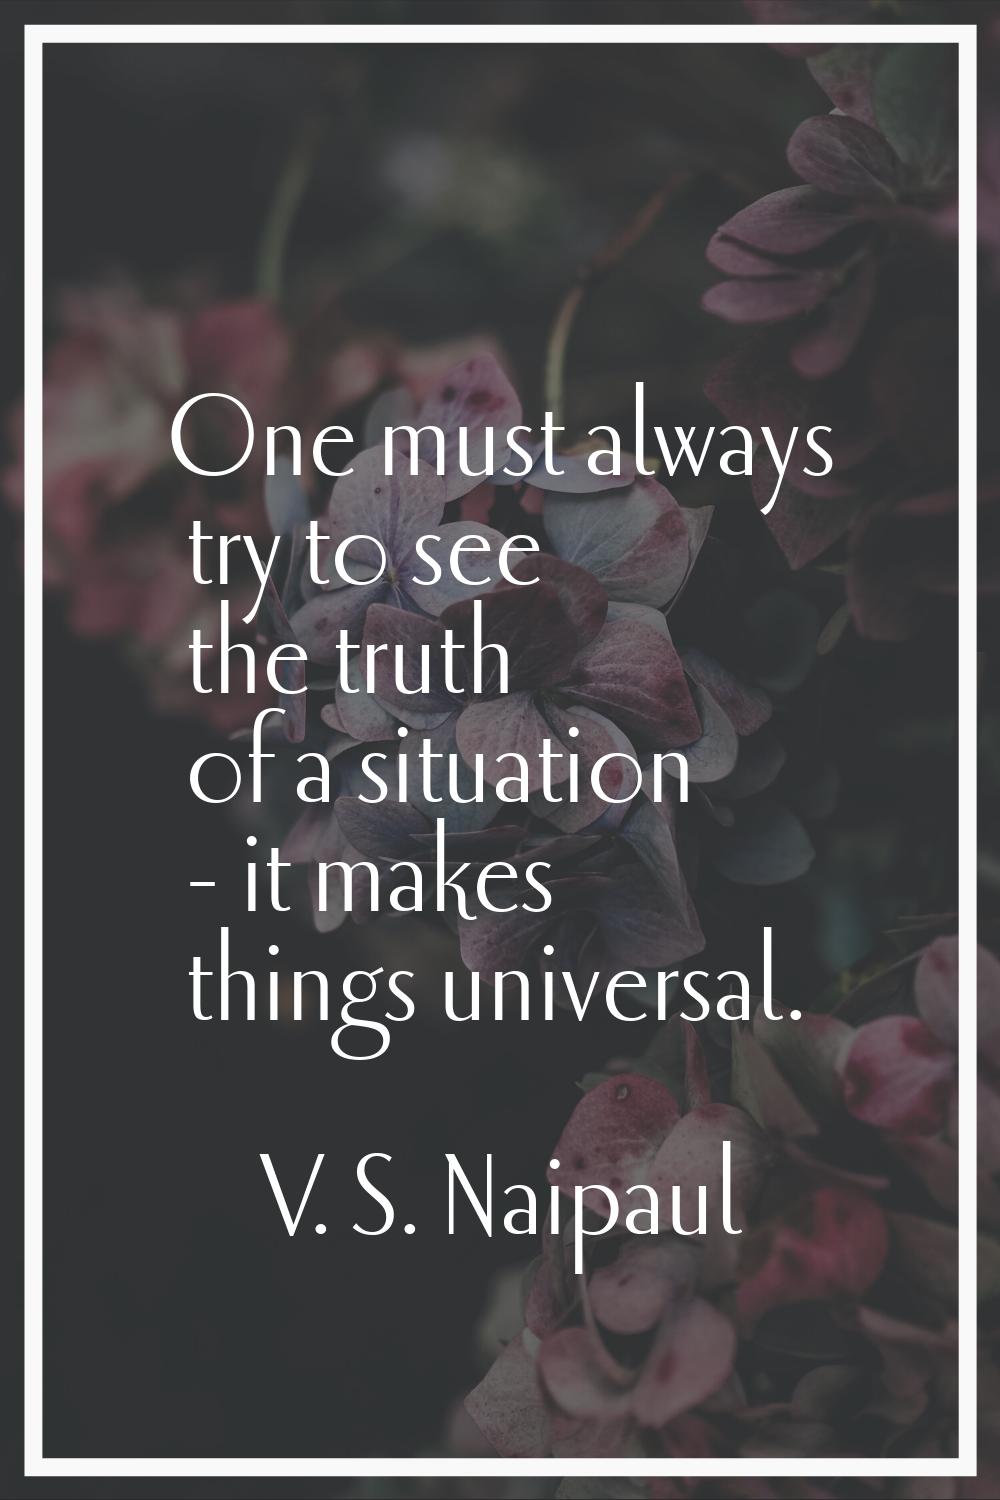 One must always try to see the truth of a situation - it makes things universal.